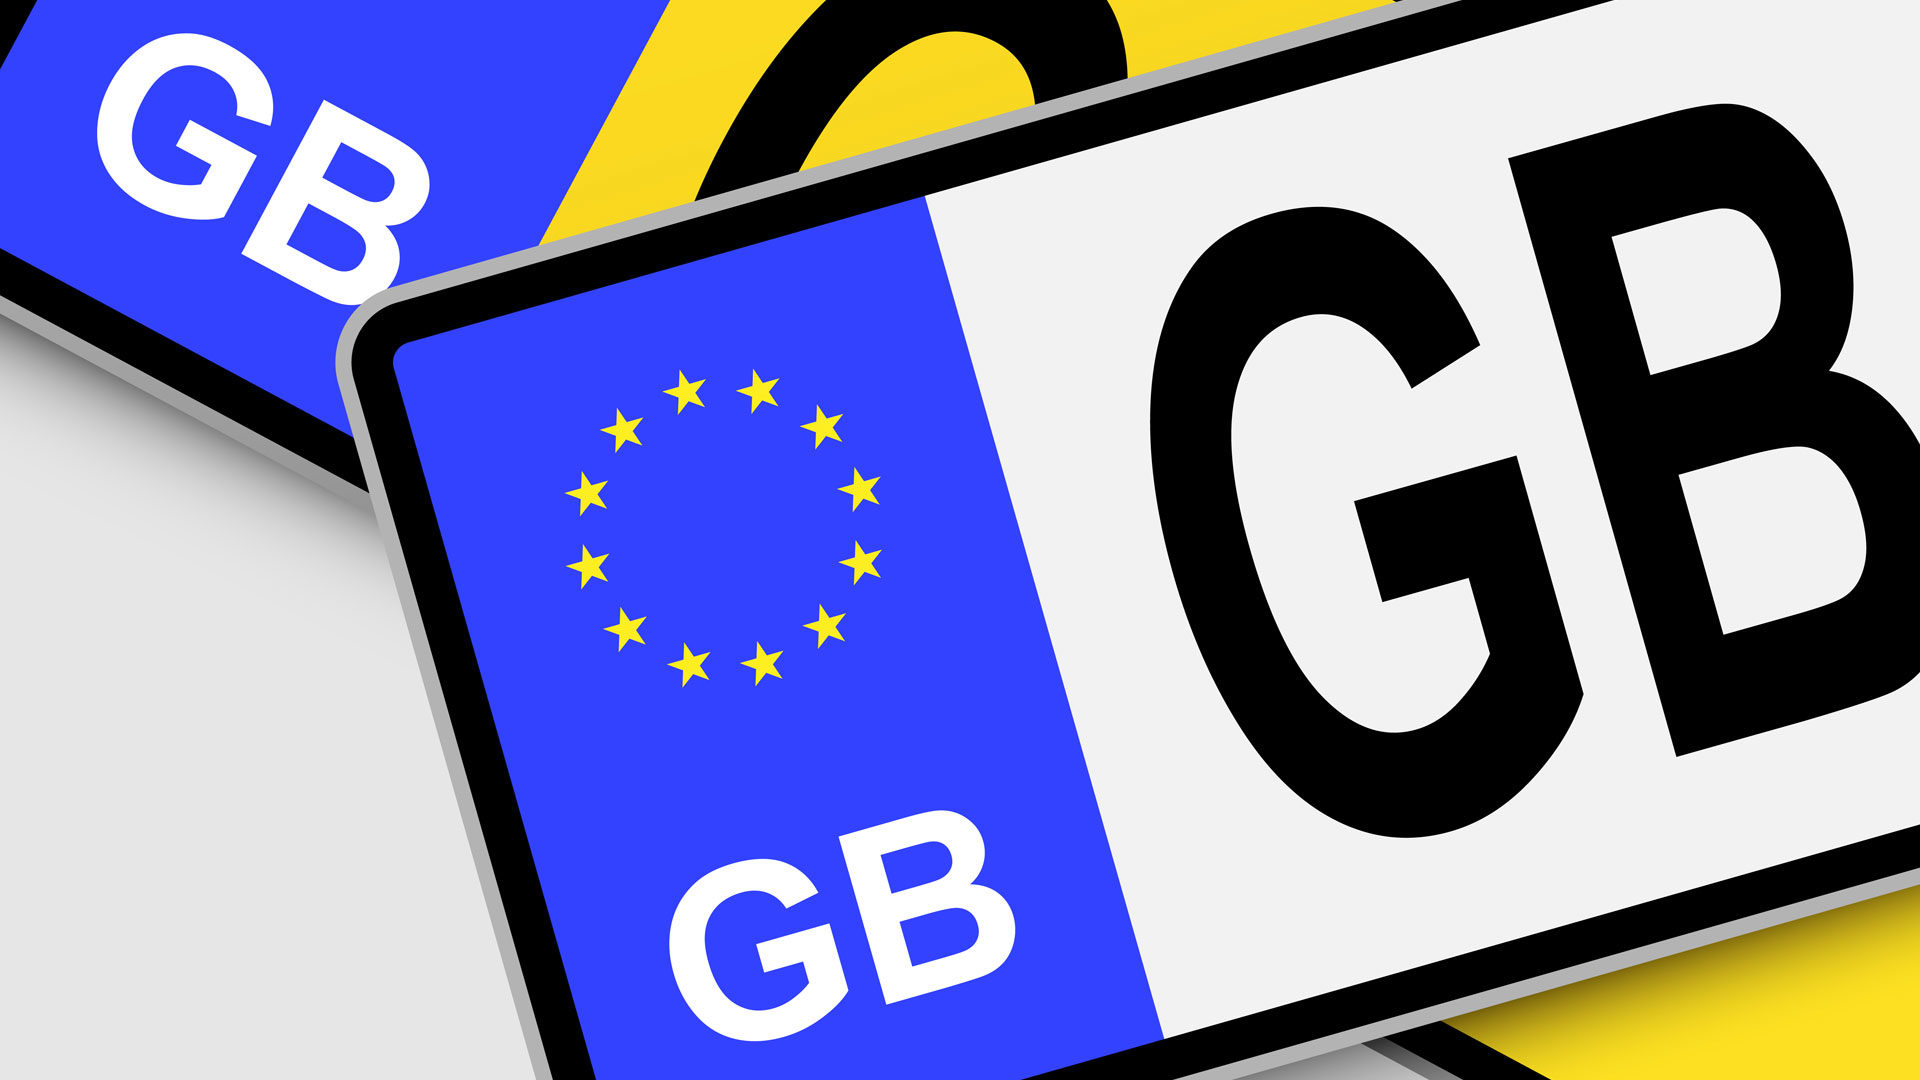 How to assign a private number plate online